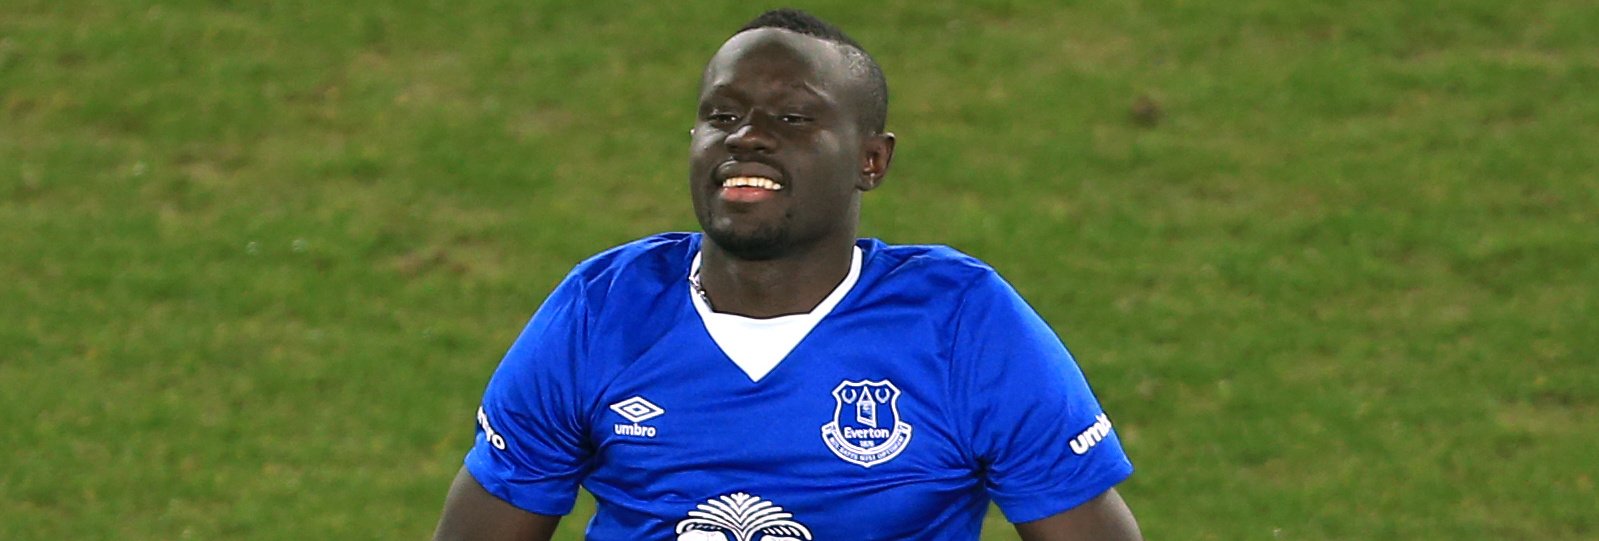 Watch: Should Koeman reconsider this hat-trick heroes future at Everton?